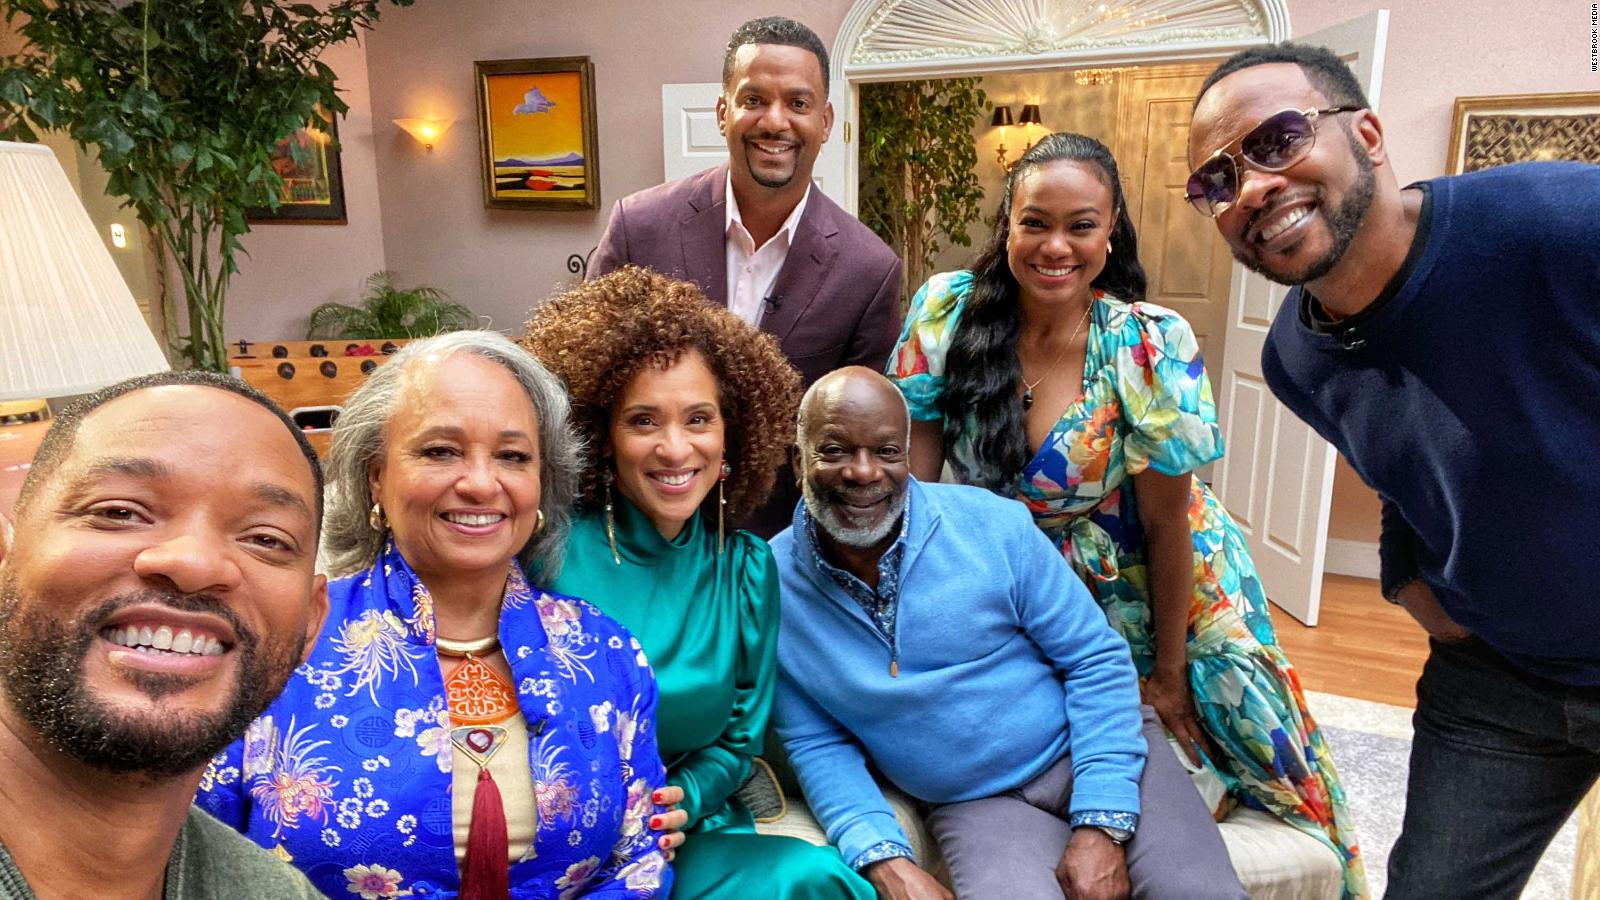 Will Smith Post of Two Aunt Viv's on Instagram Will Leave You Excited For The 'Fresh Prince' Reunion